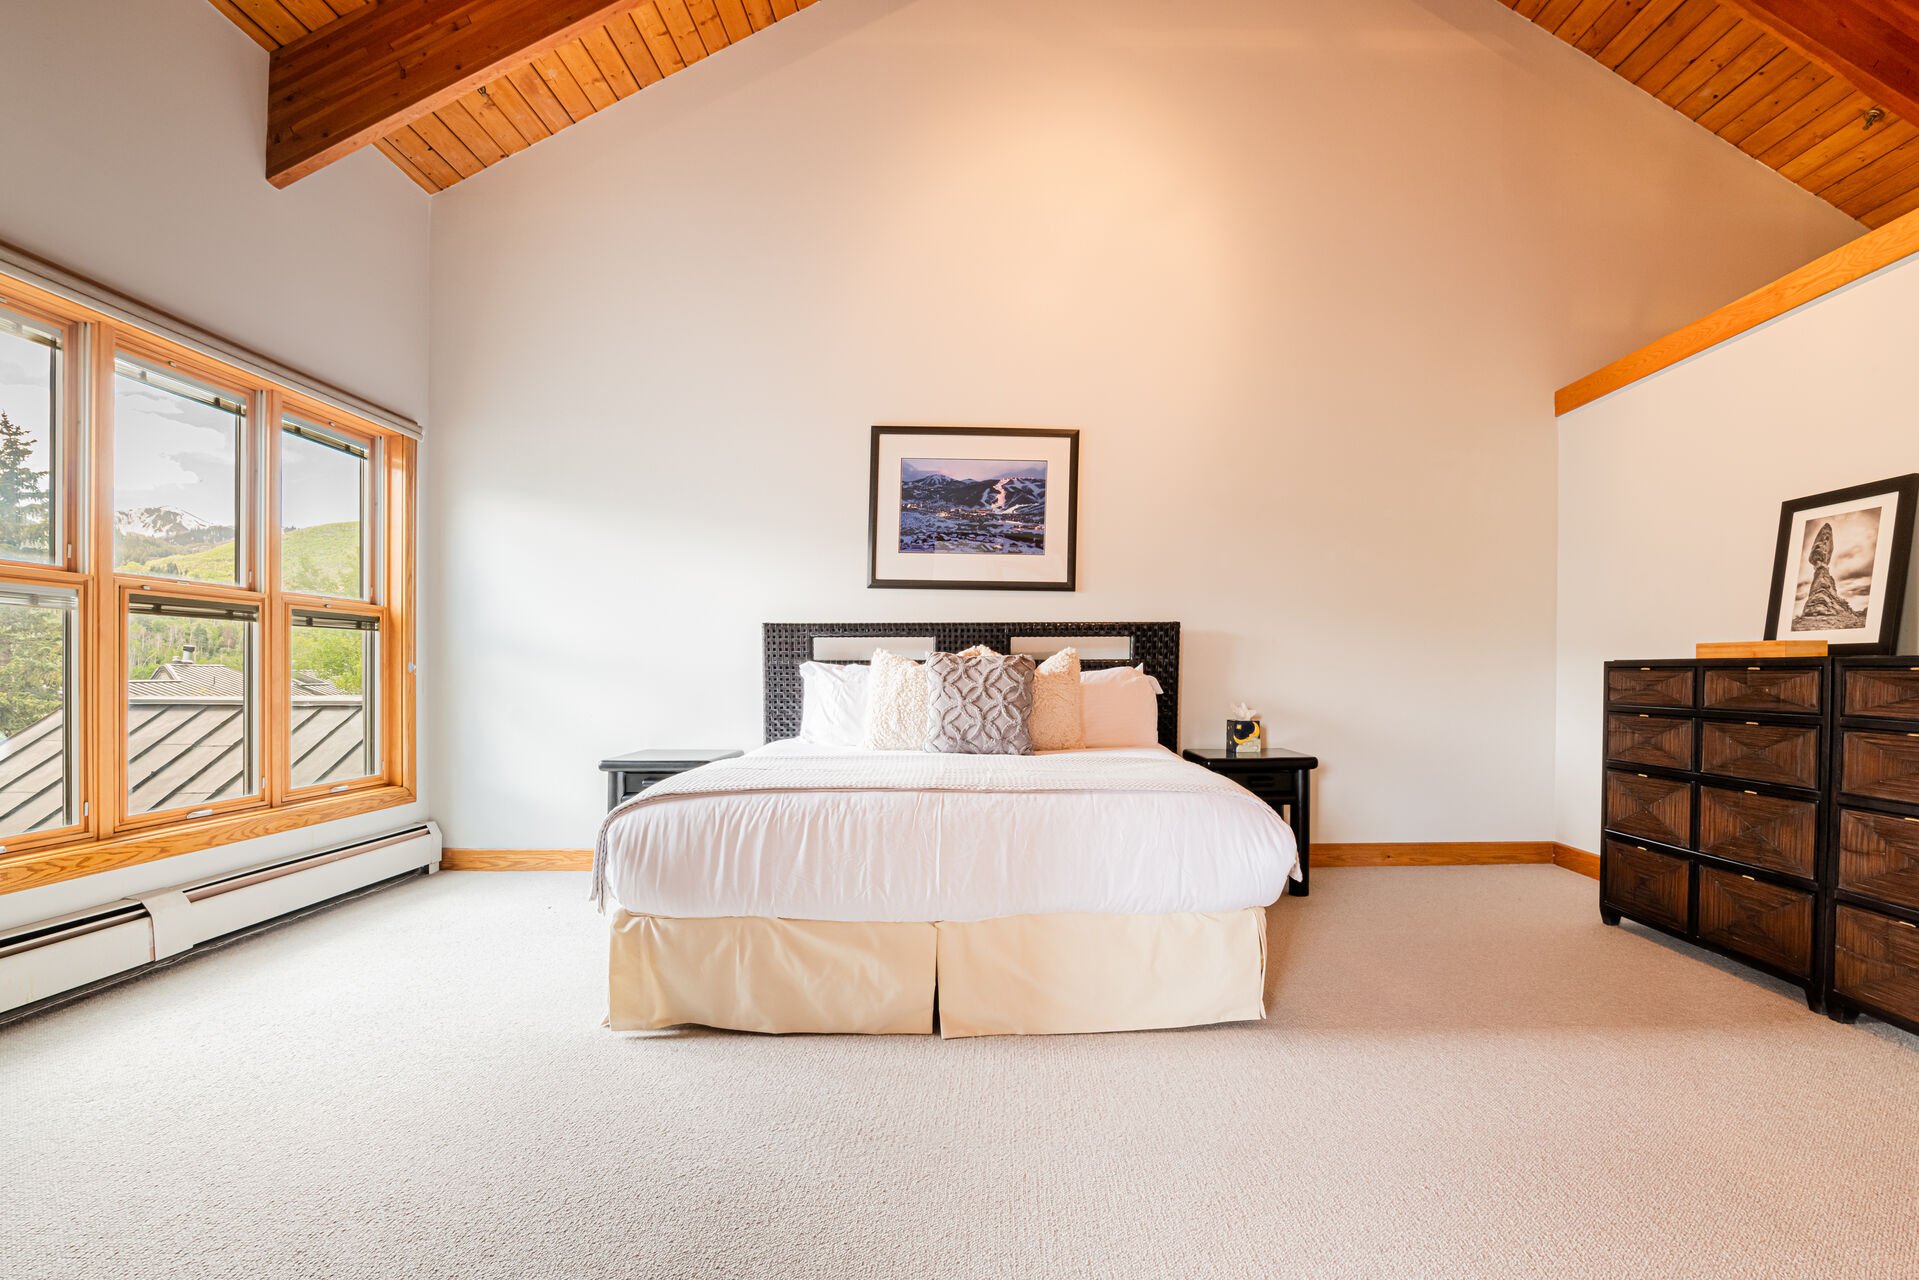 4th Level Grand Master Bedroom with a King Bed and Mountain Views